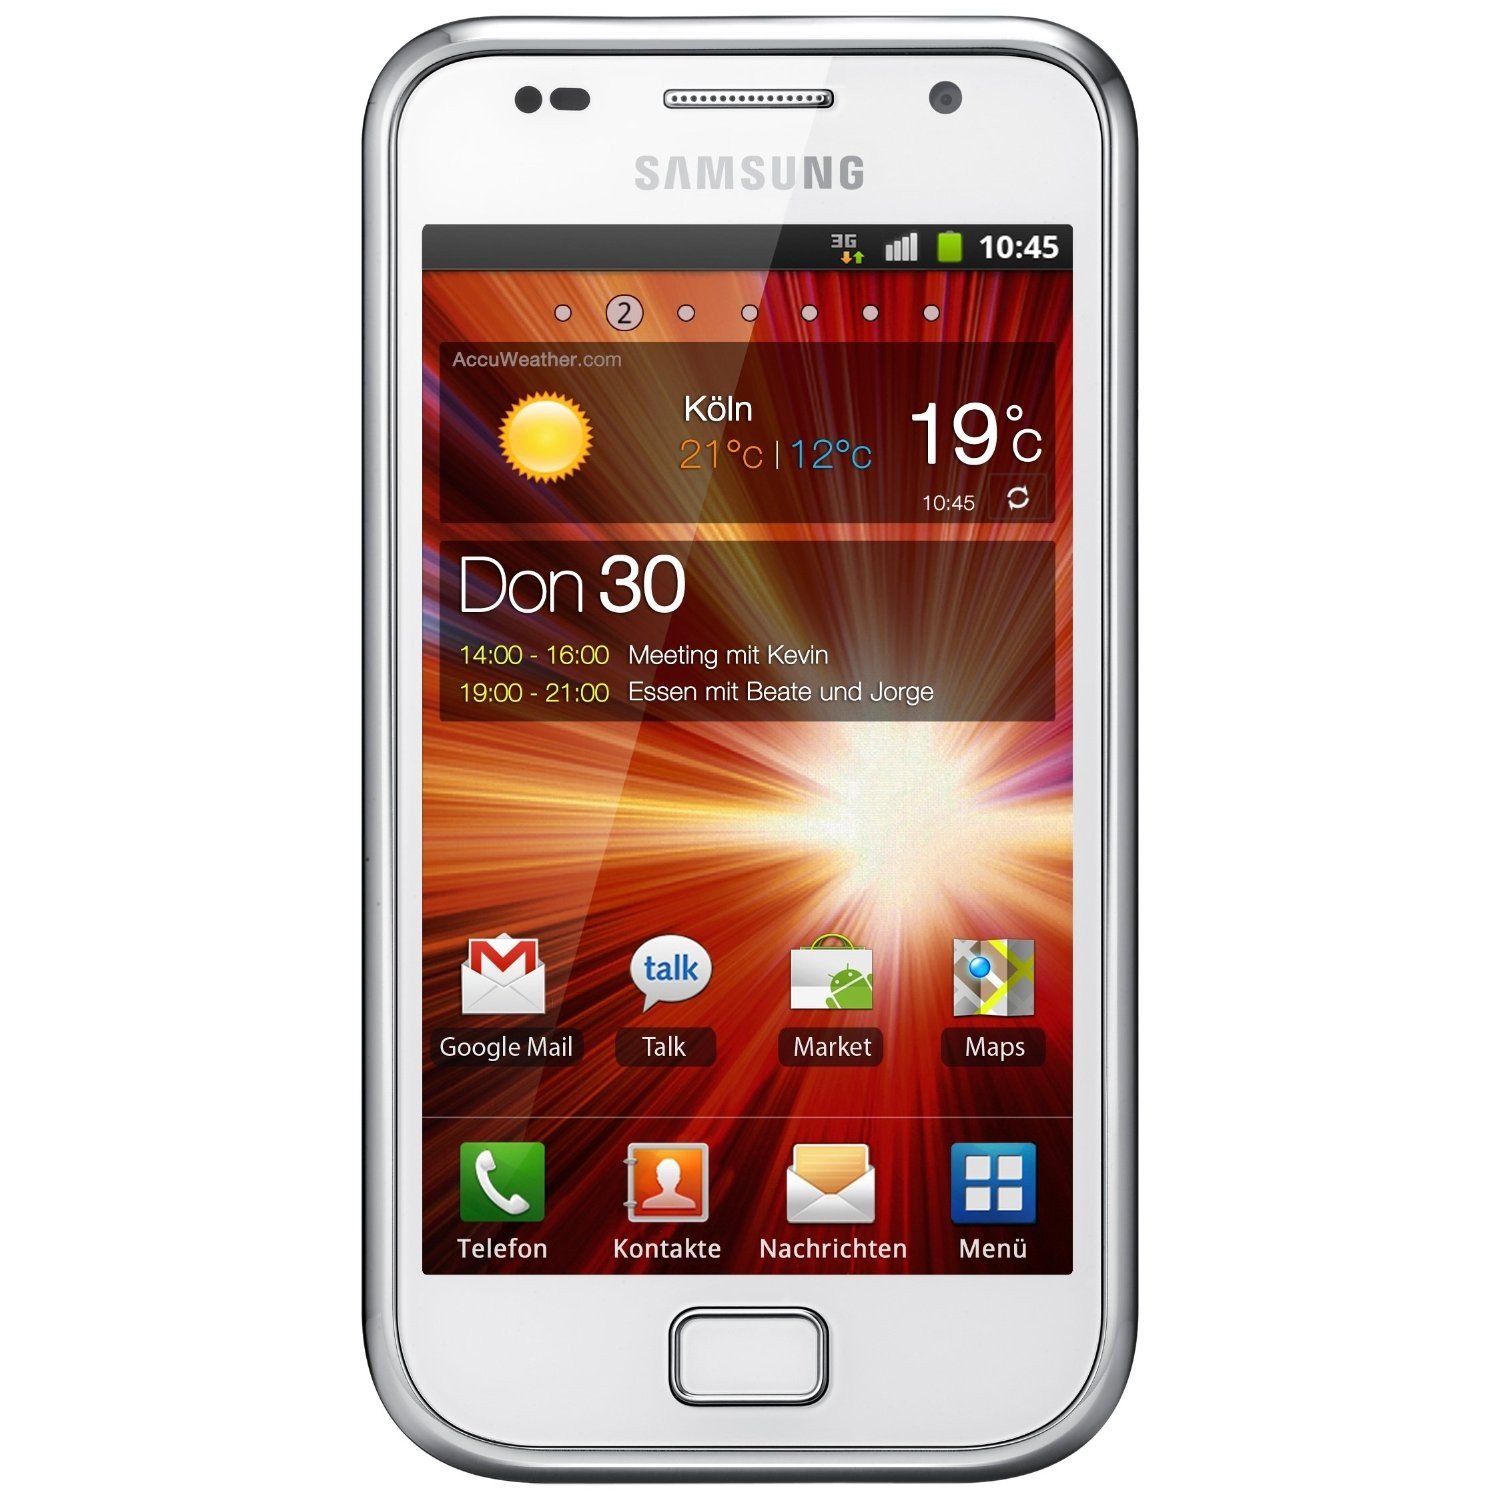 Samsung I9001 Galaxy S Plus specs, review, date - PhonesData